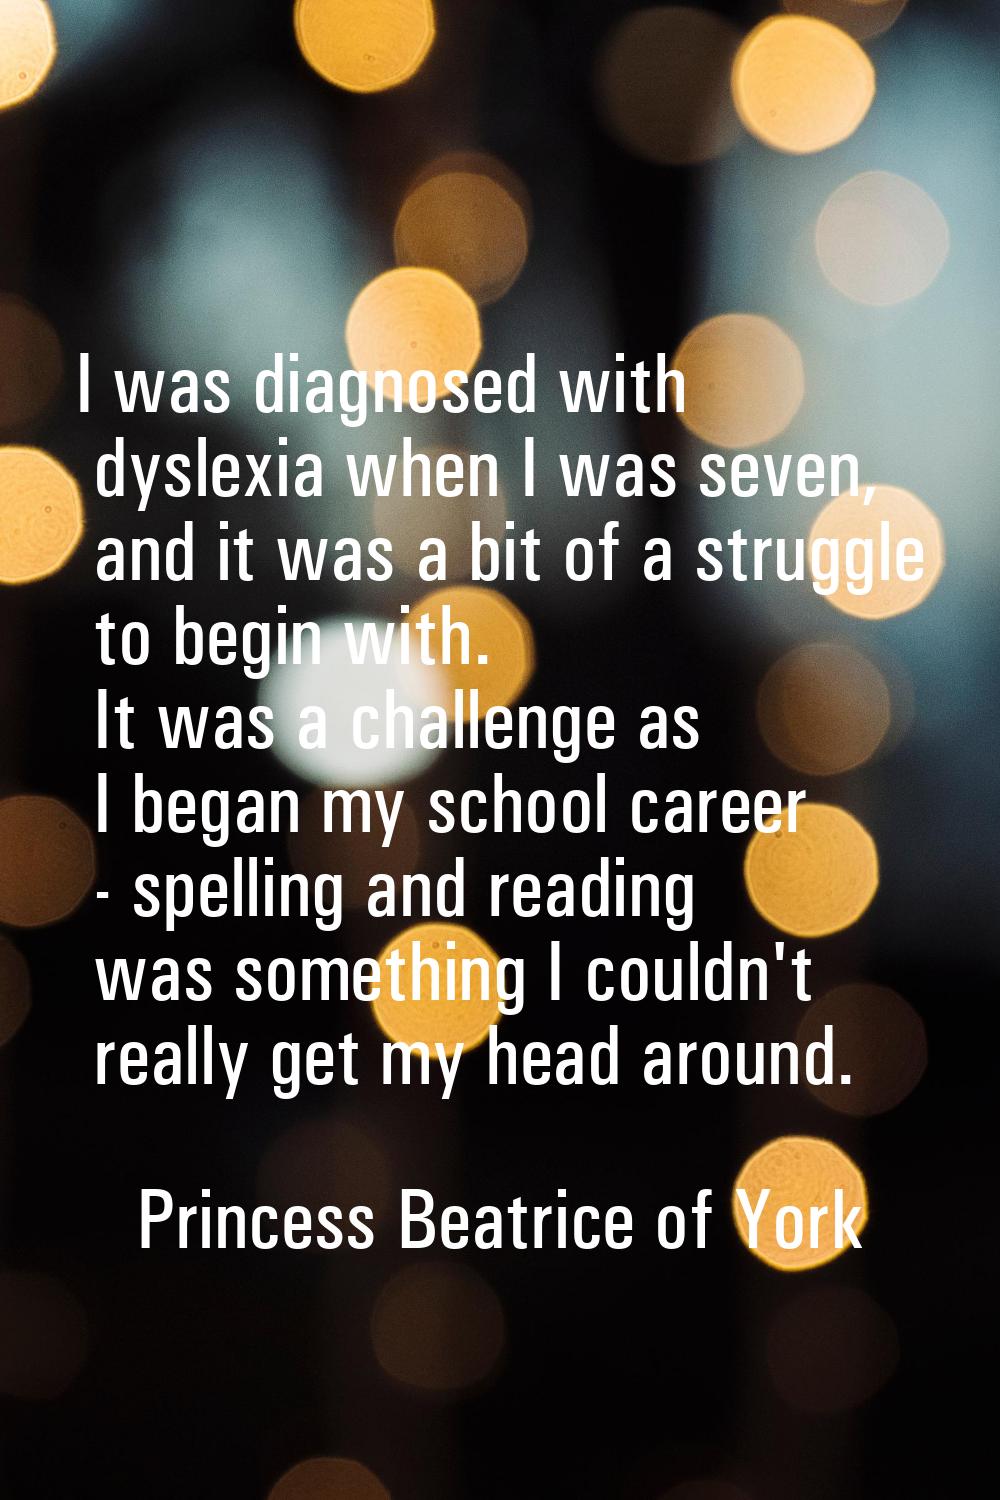 I was diagnosed with dyslexia when I was seven, and it was a bit of a struggle to begin with. It wa